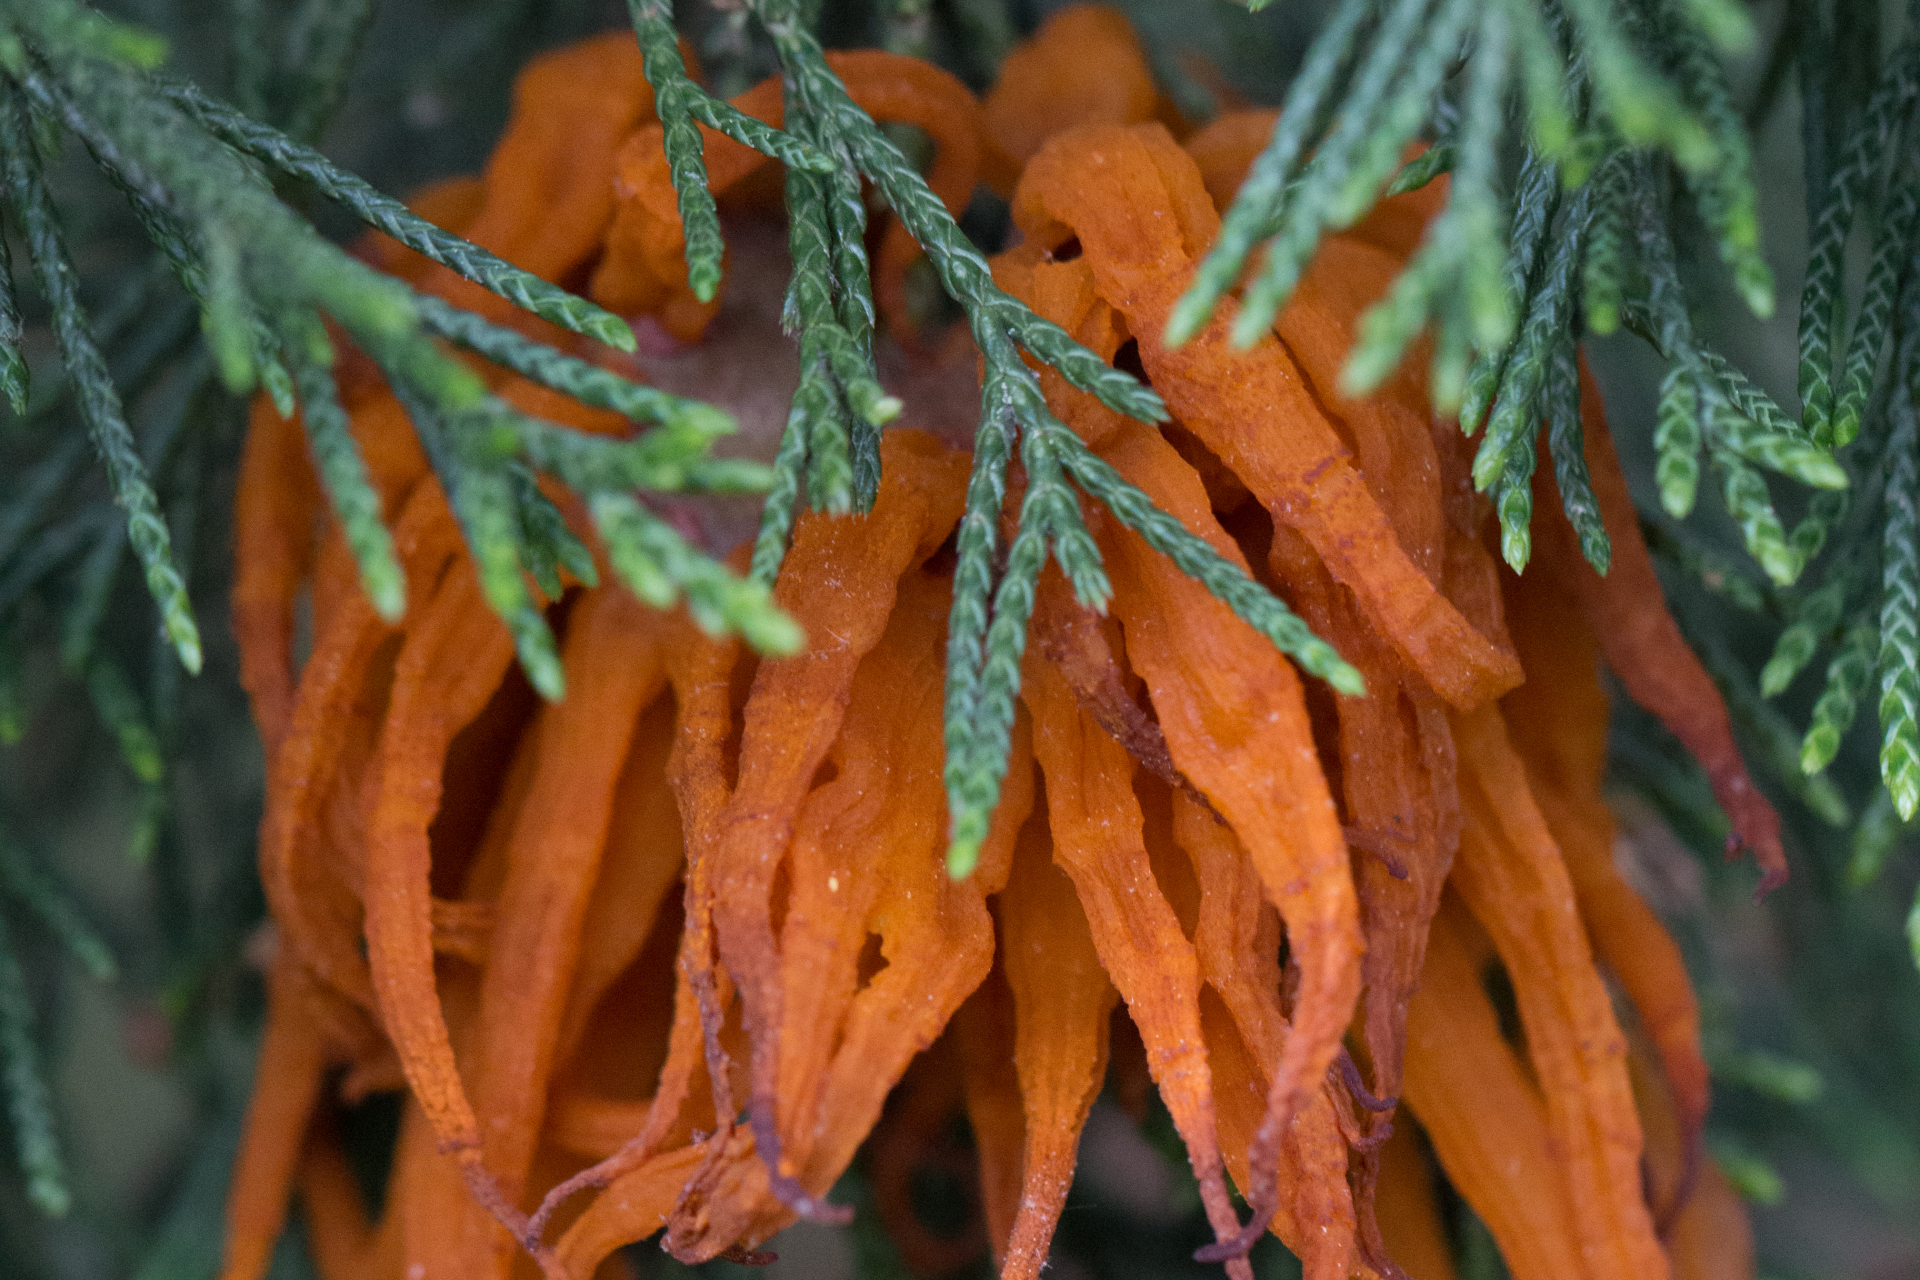 Long orange fungus growing out of evergreen